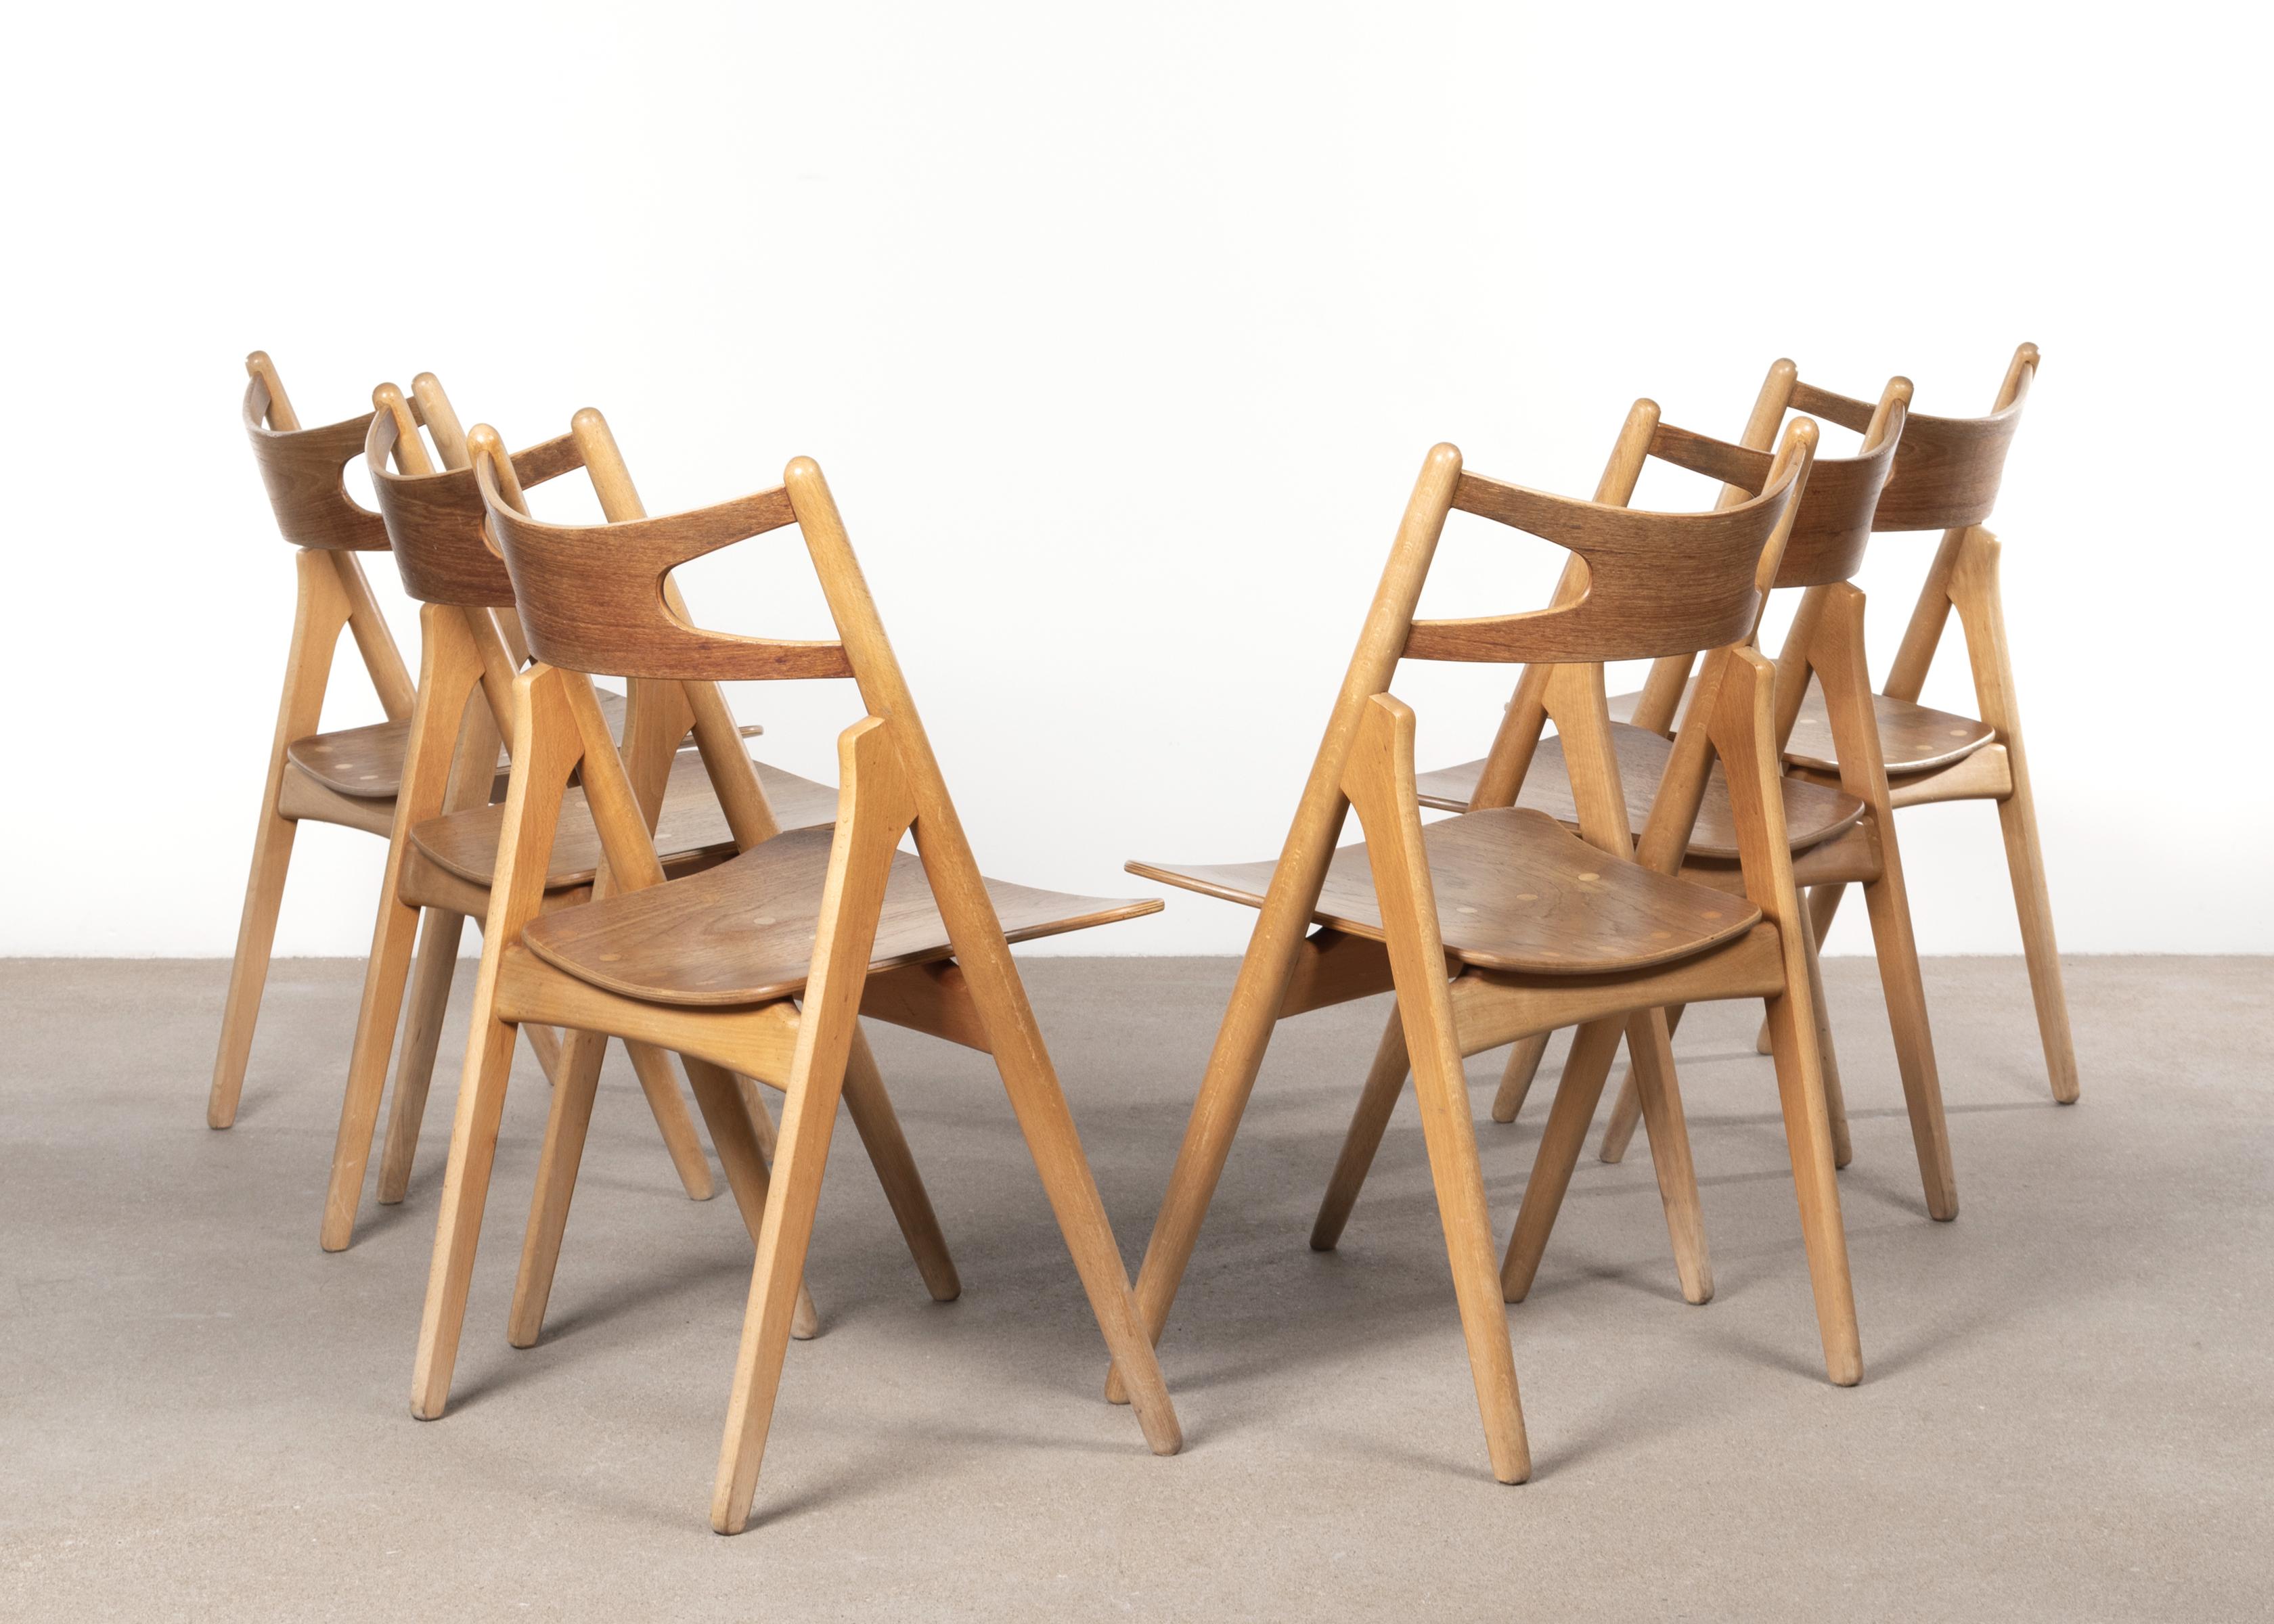 Hans Wegner sawbuck chairs model CH 29 for Carl Hansen. Beechwood frames and plywood teak seats / backrests with strong wood grain all in good untouched original condition. Available as set of 6 chairs with matching table if desired. Signed with